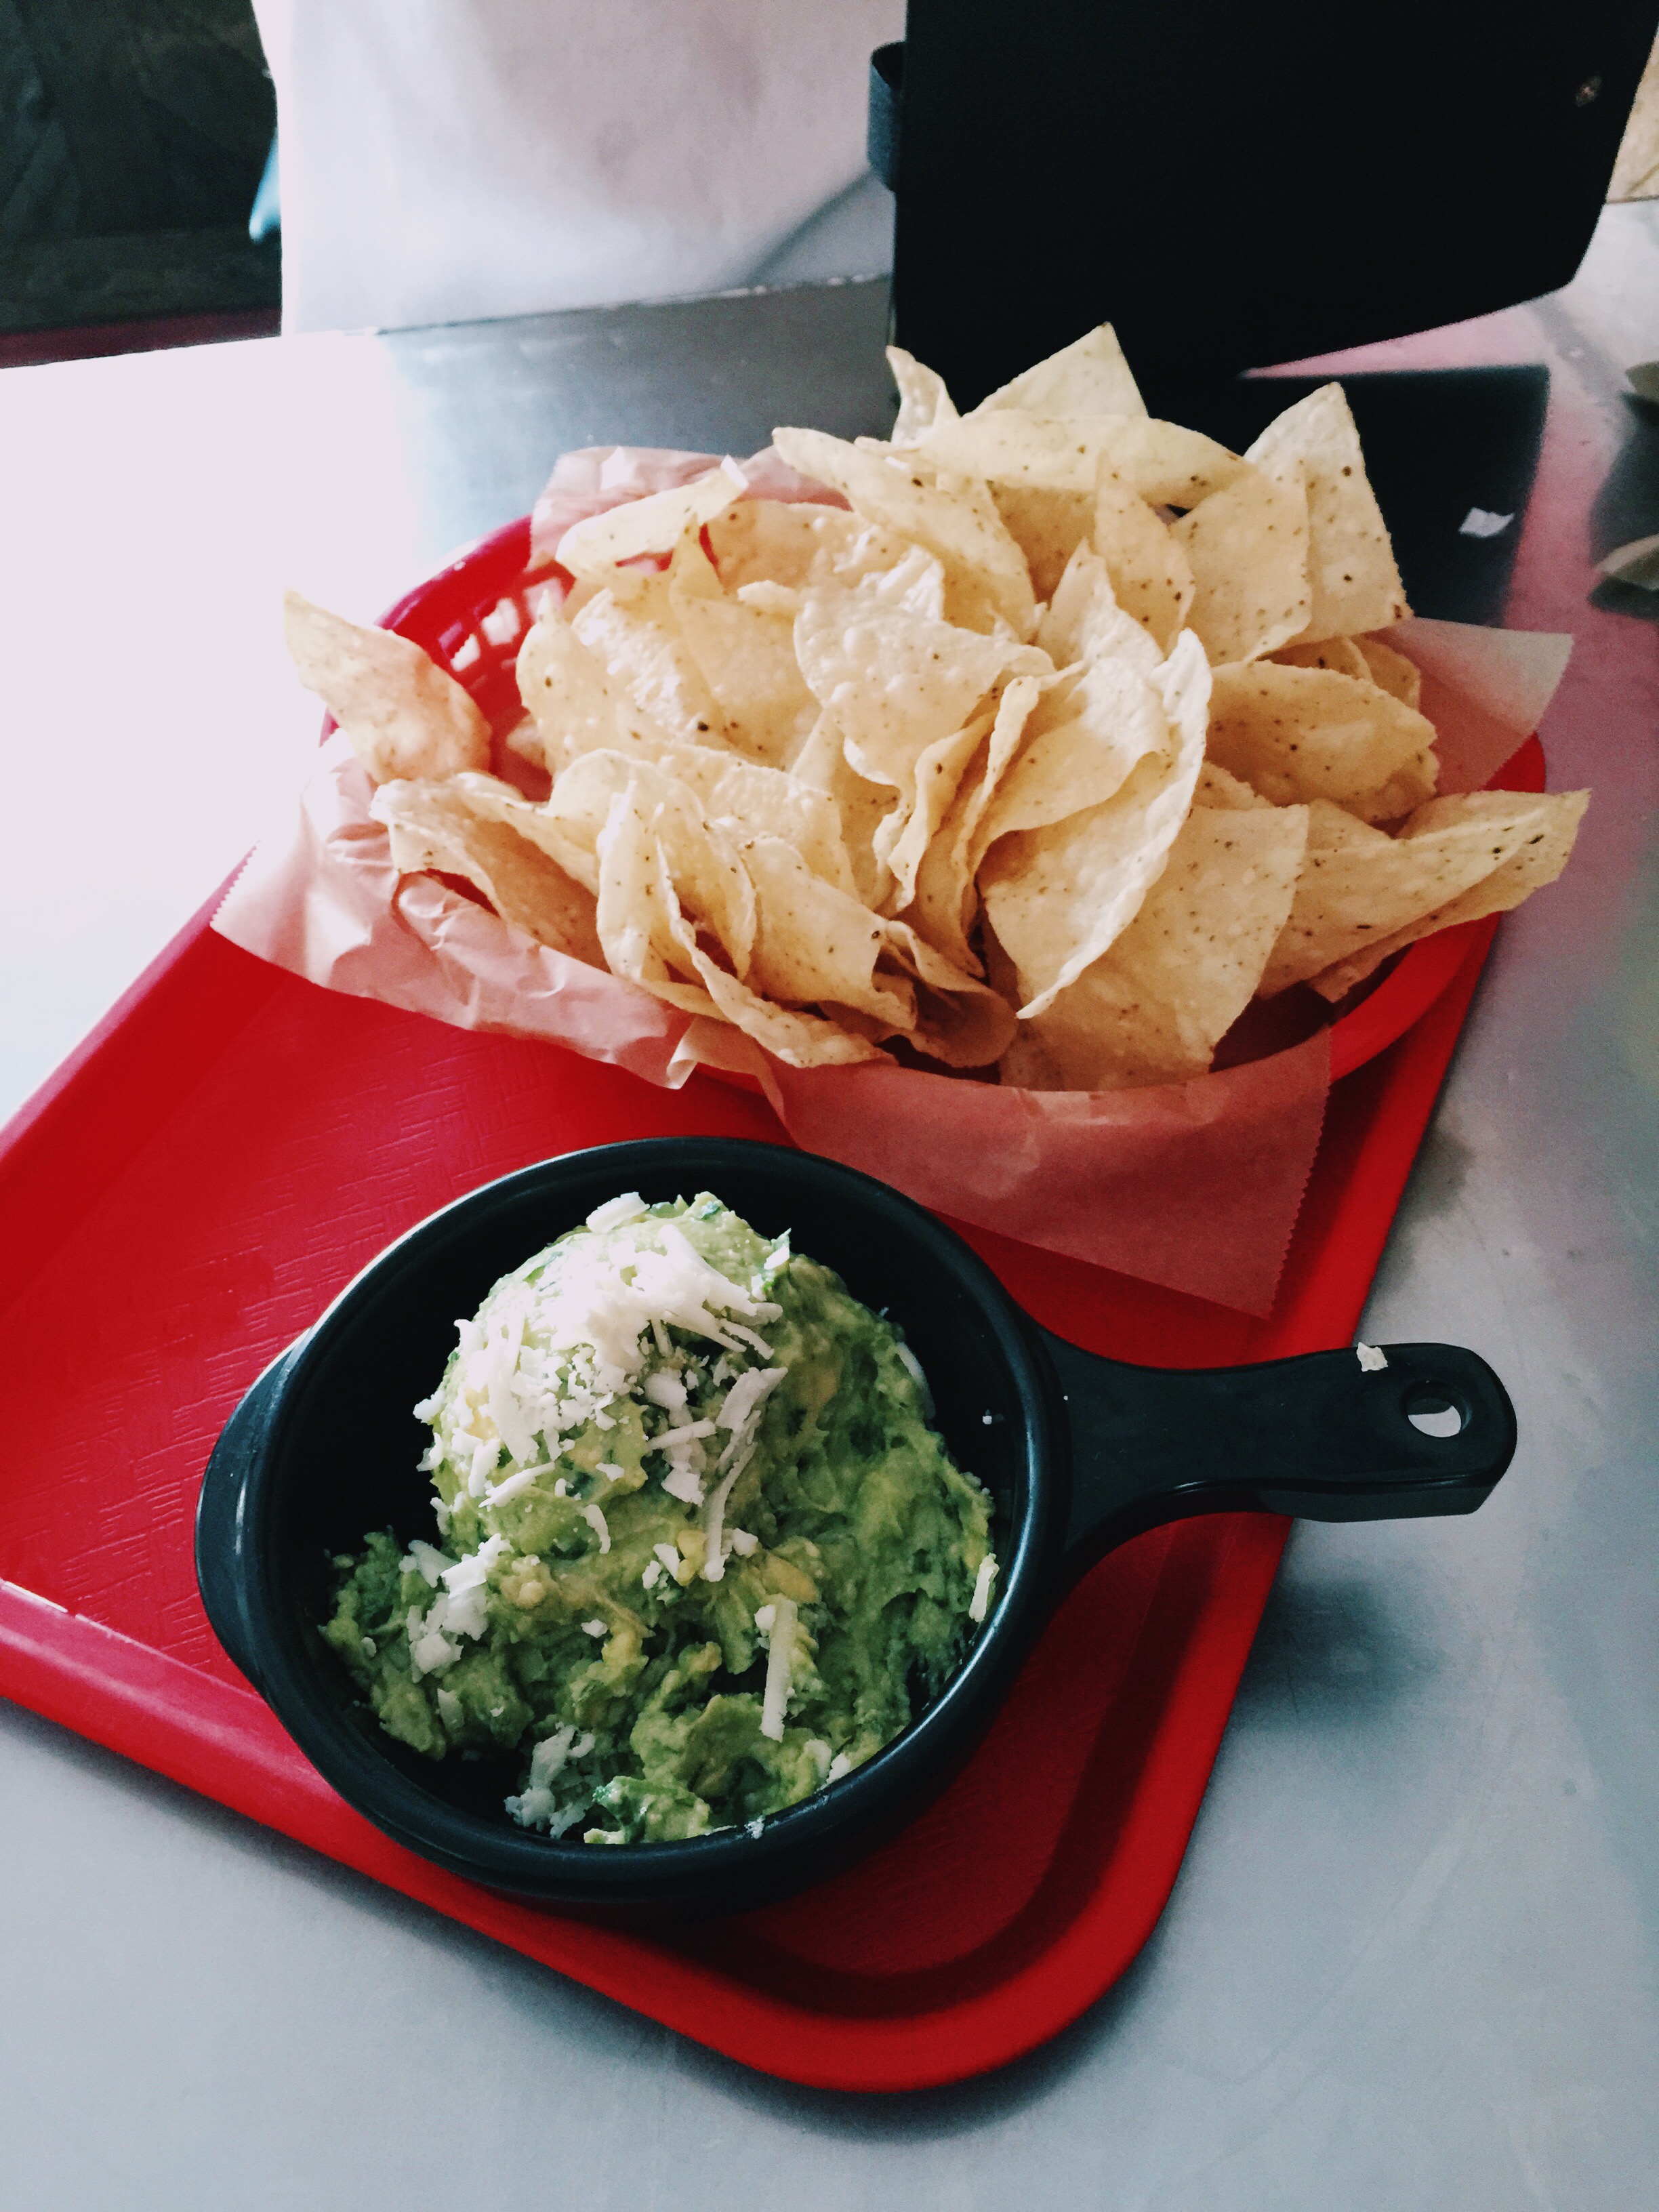   {chips and guacamole at torchy's tacos.}  